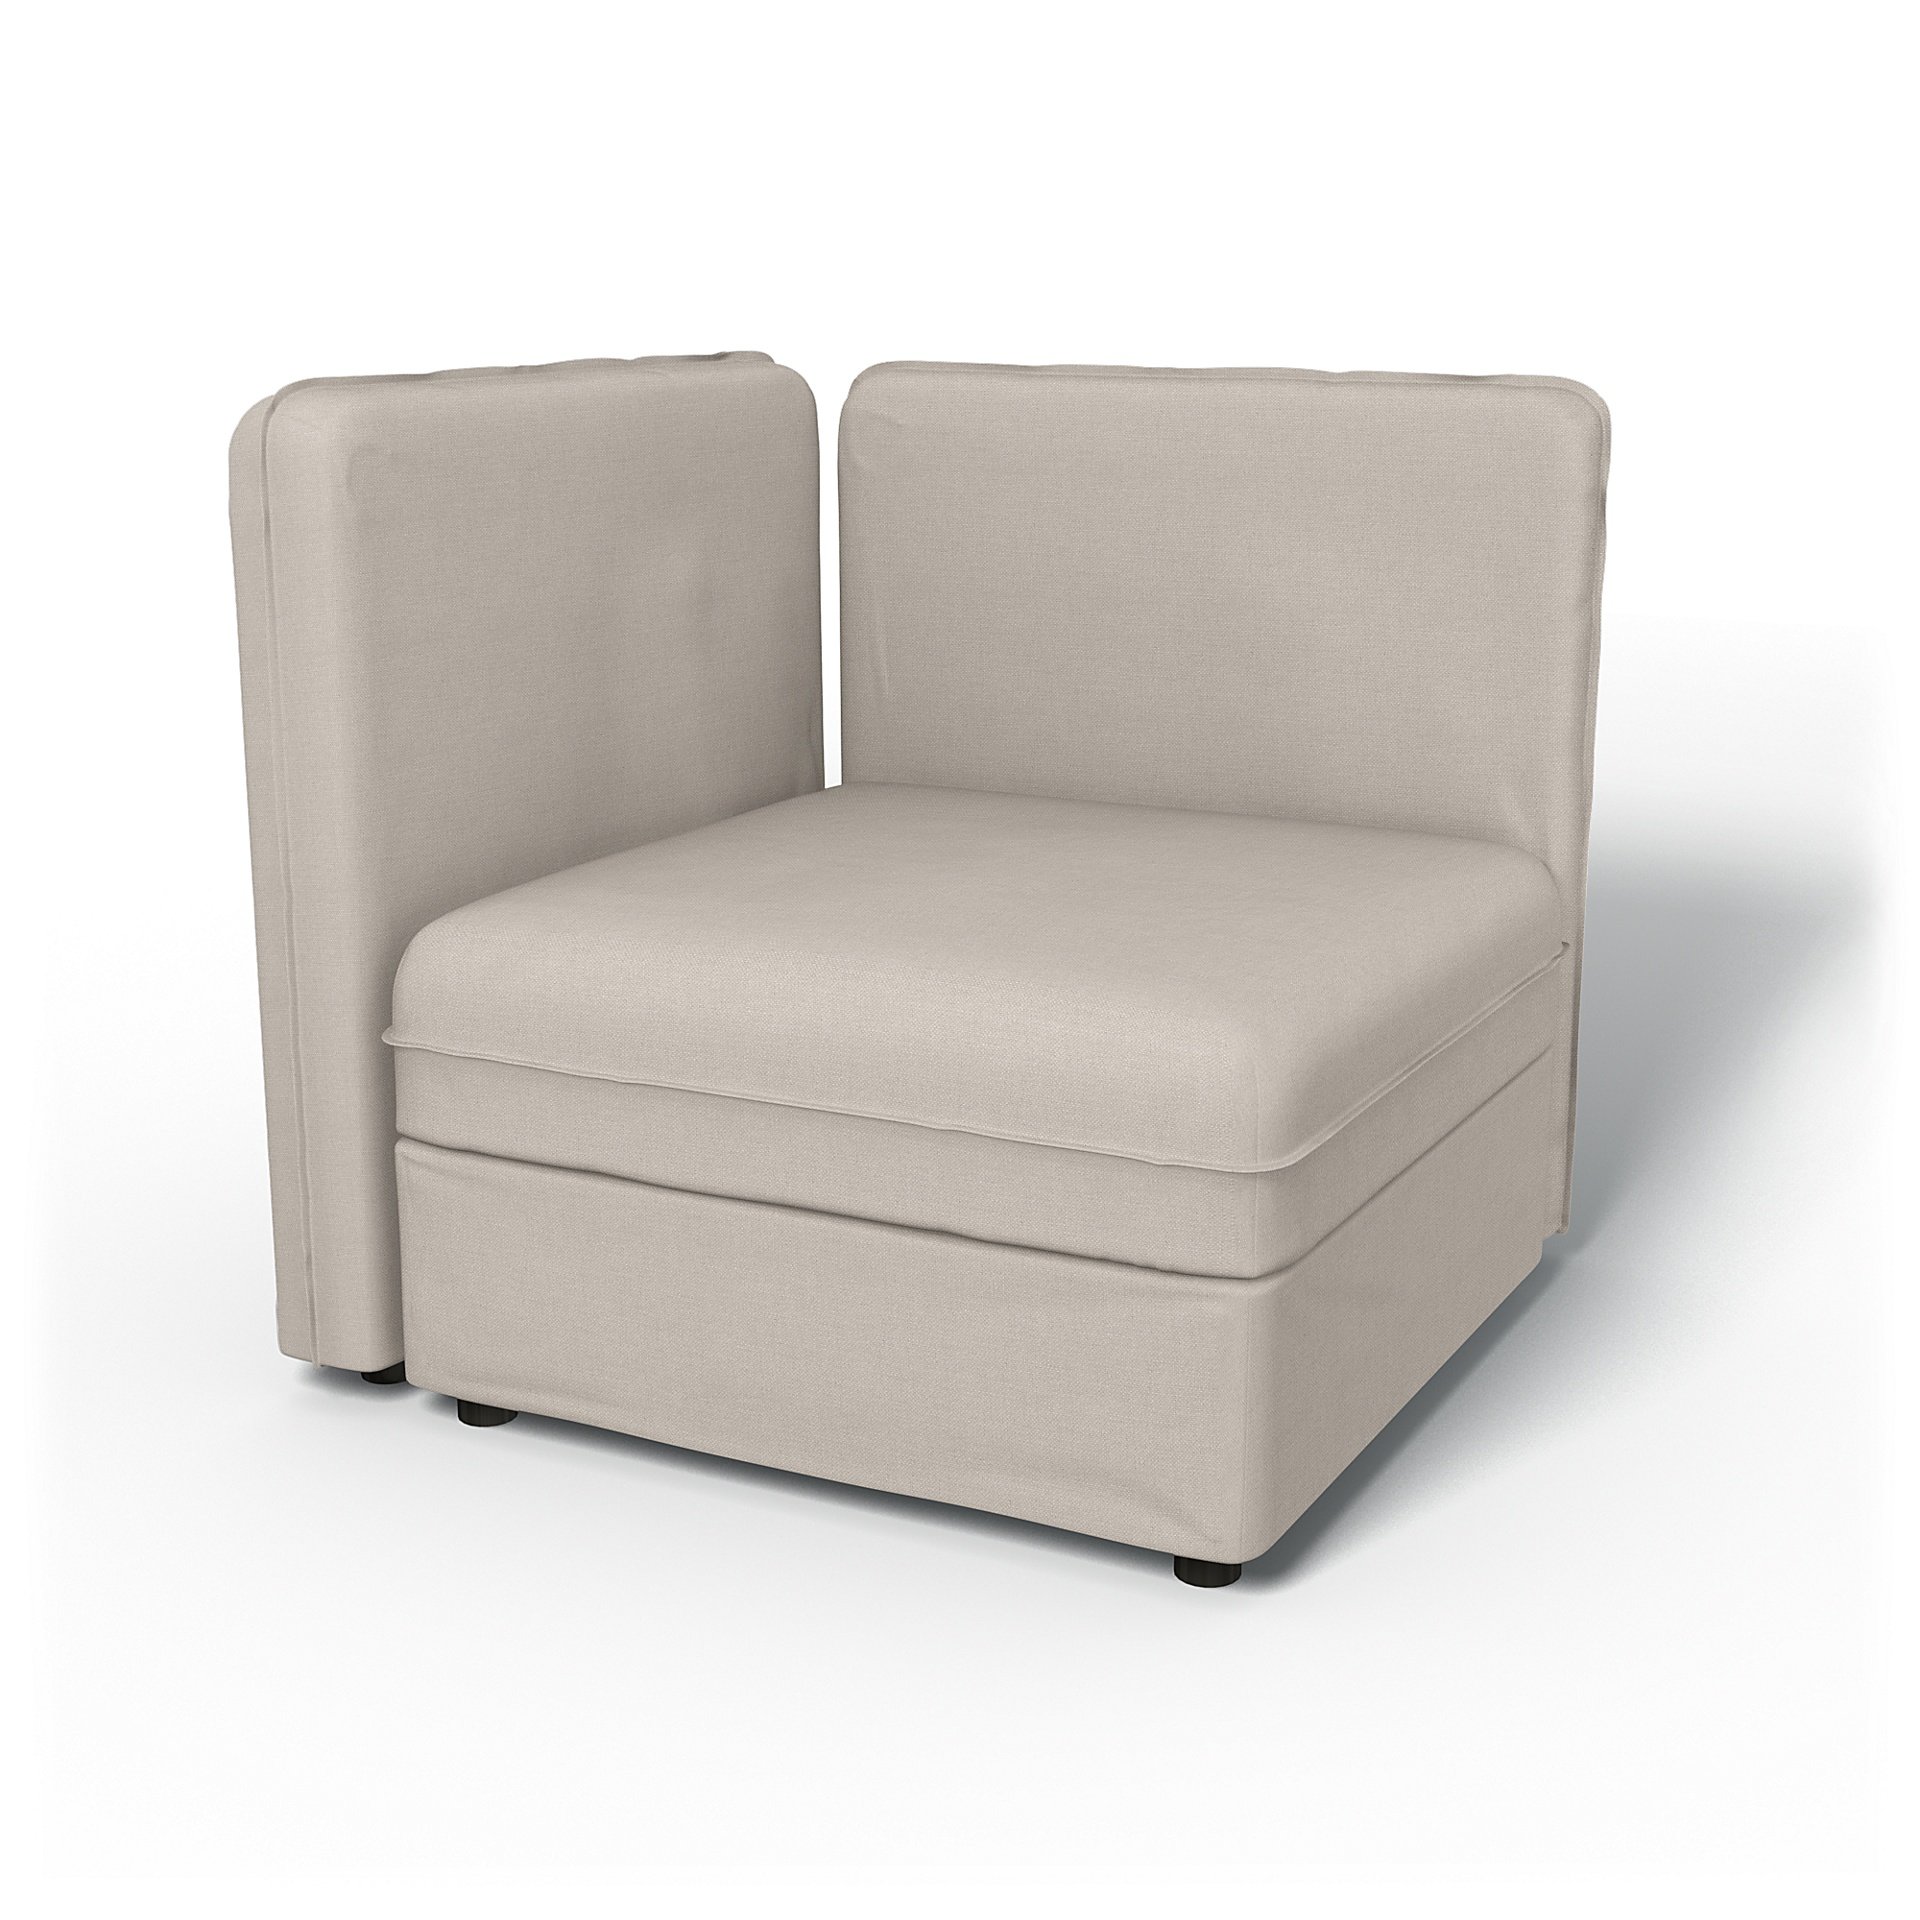 IKEA - Vallentuna Seat Module with Low Back and Storage Cover 80x80cm 32x32in, Chalk, Linen - Bemz